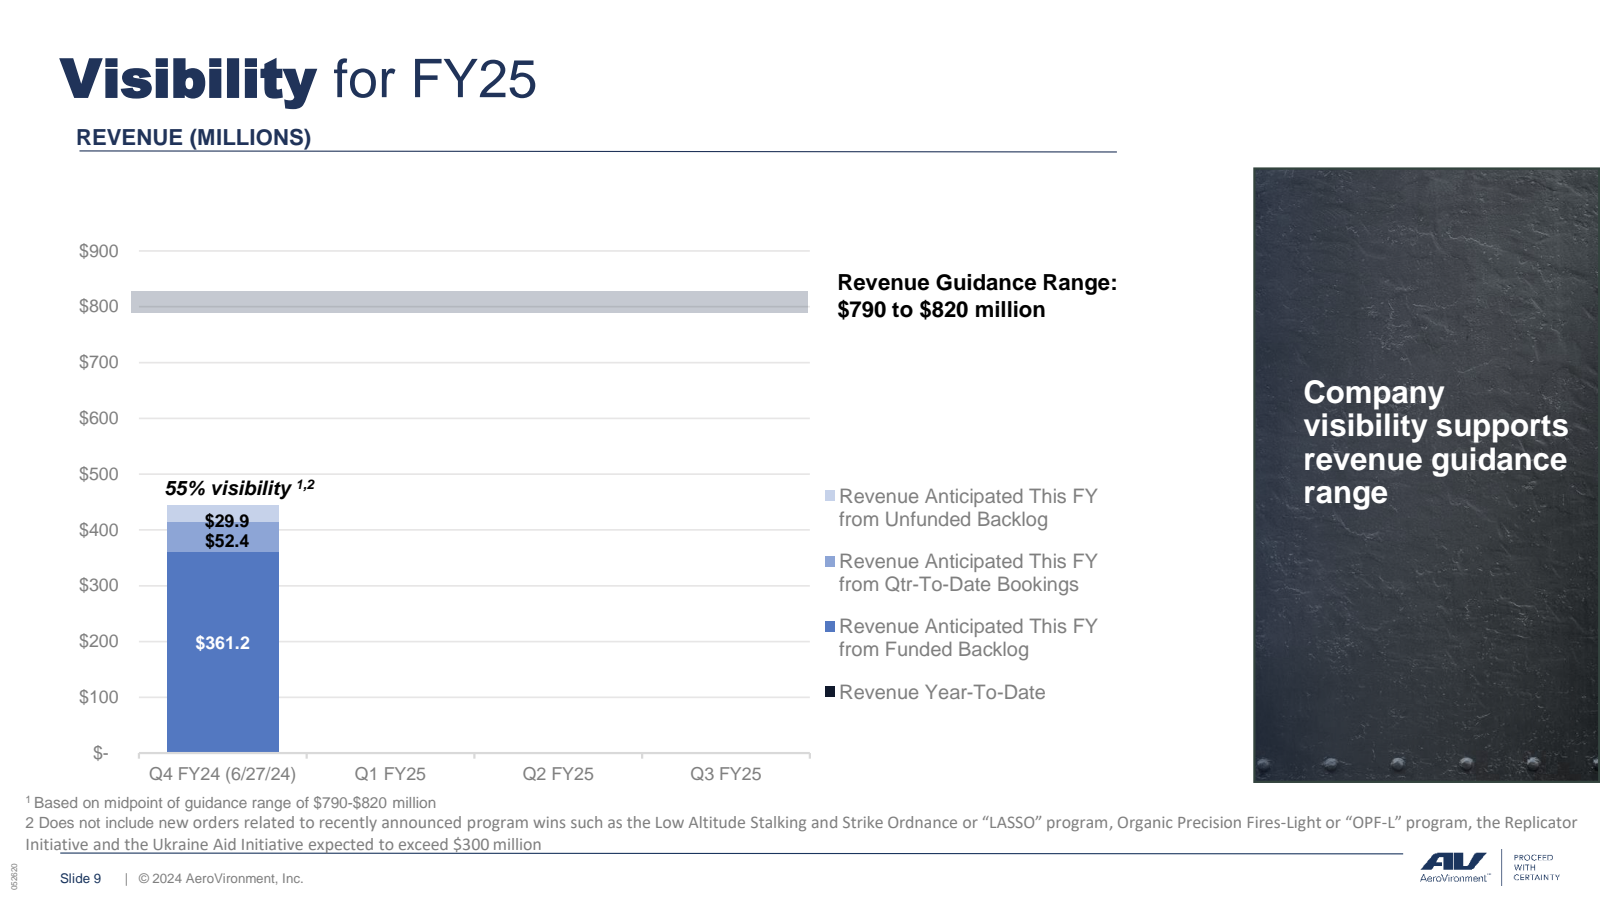 Visibility for FY25 